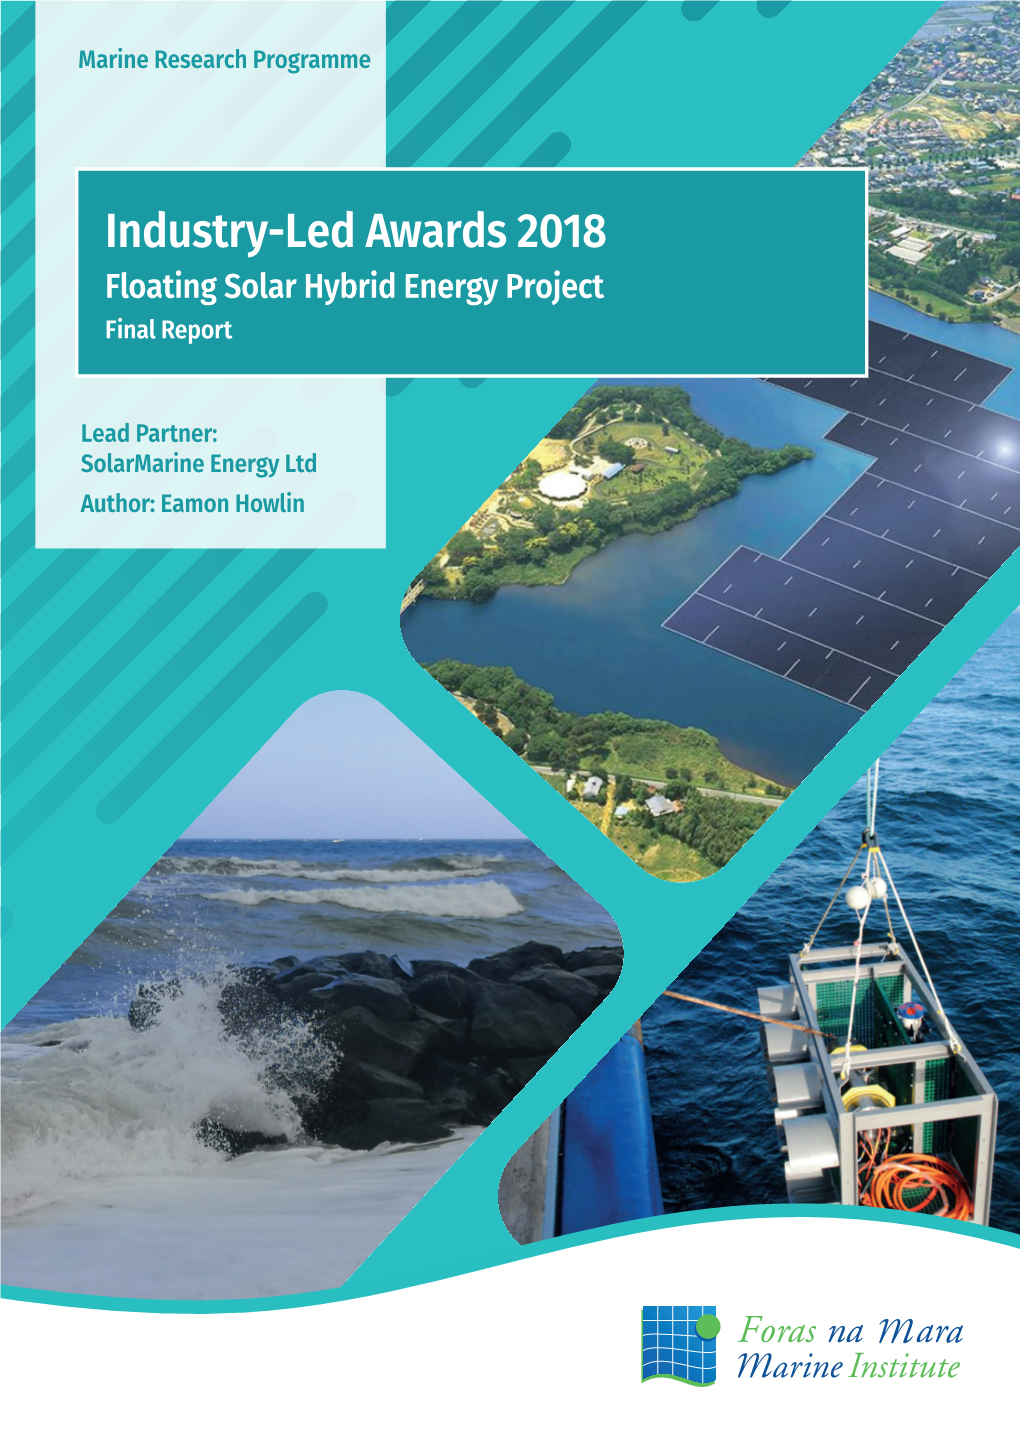 Industry-Led Awards 2018 Floating Solar Hybrid Energy Project Final Report